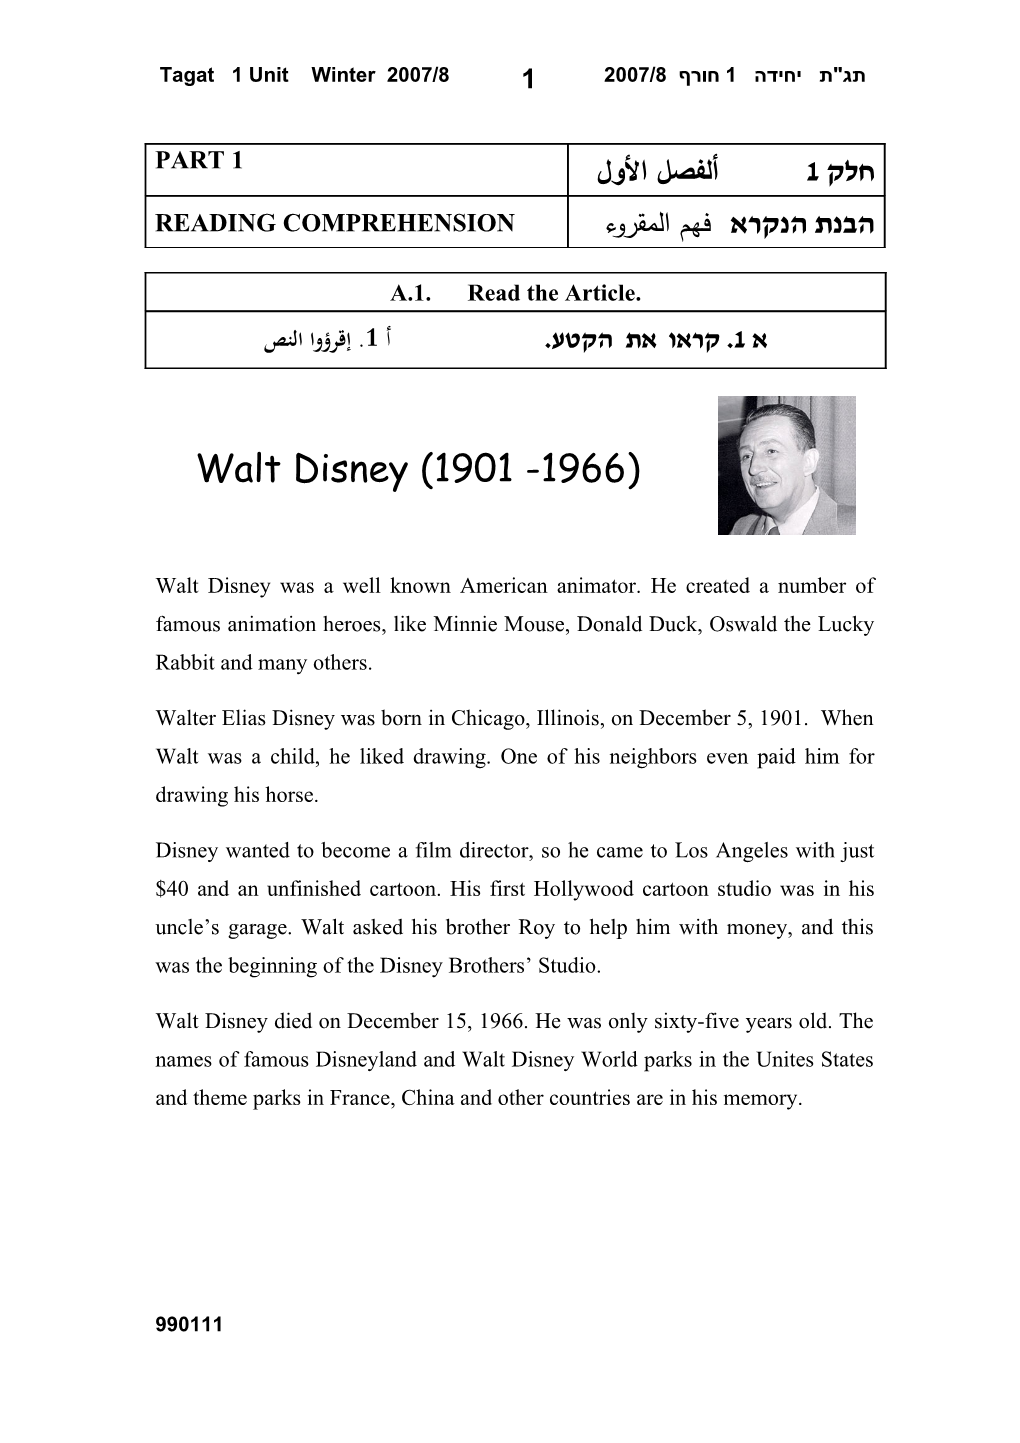 Walt Disney Was a Well Known American Animator. He Created a Number of Famous Animation